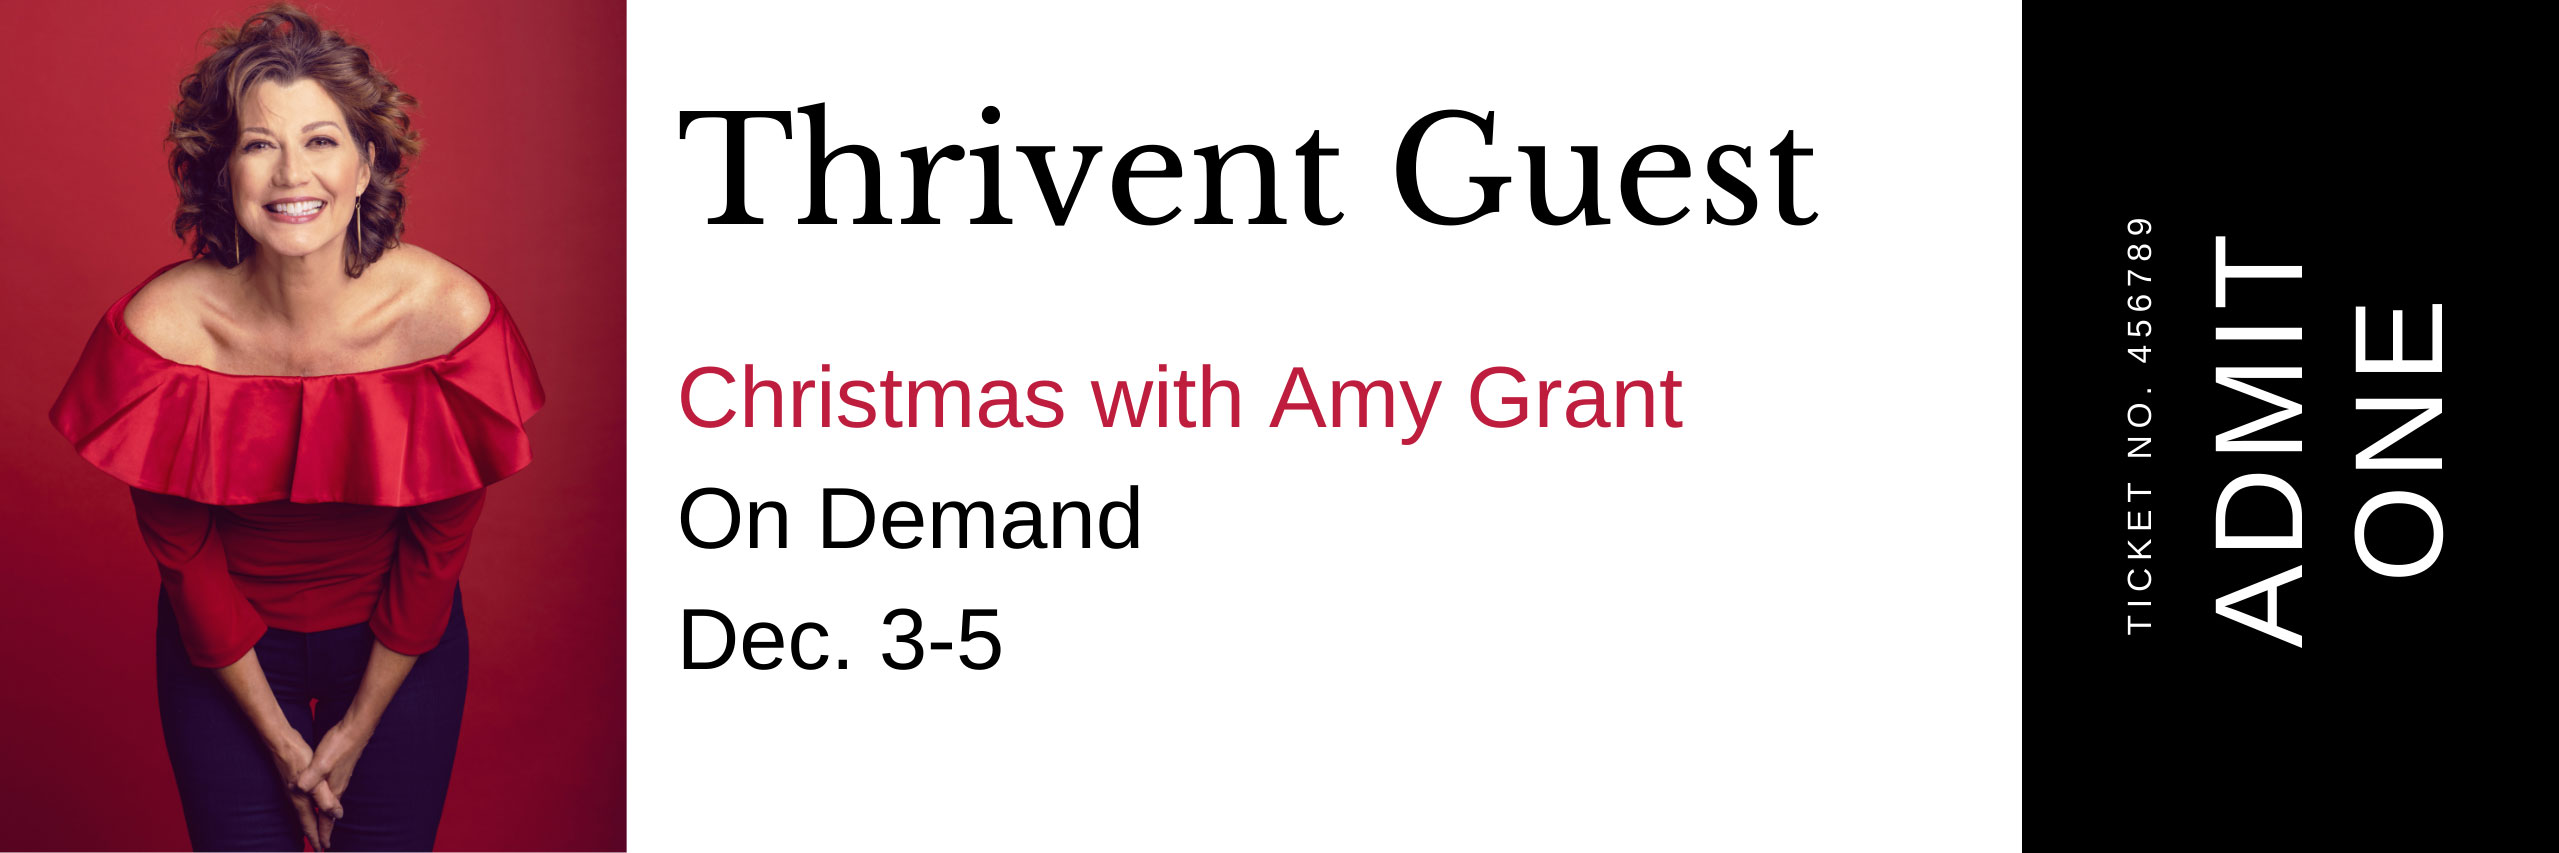 amy grant christmas tour 2022 tickets